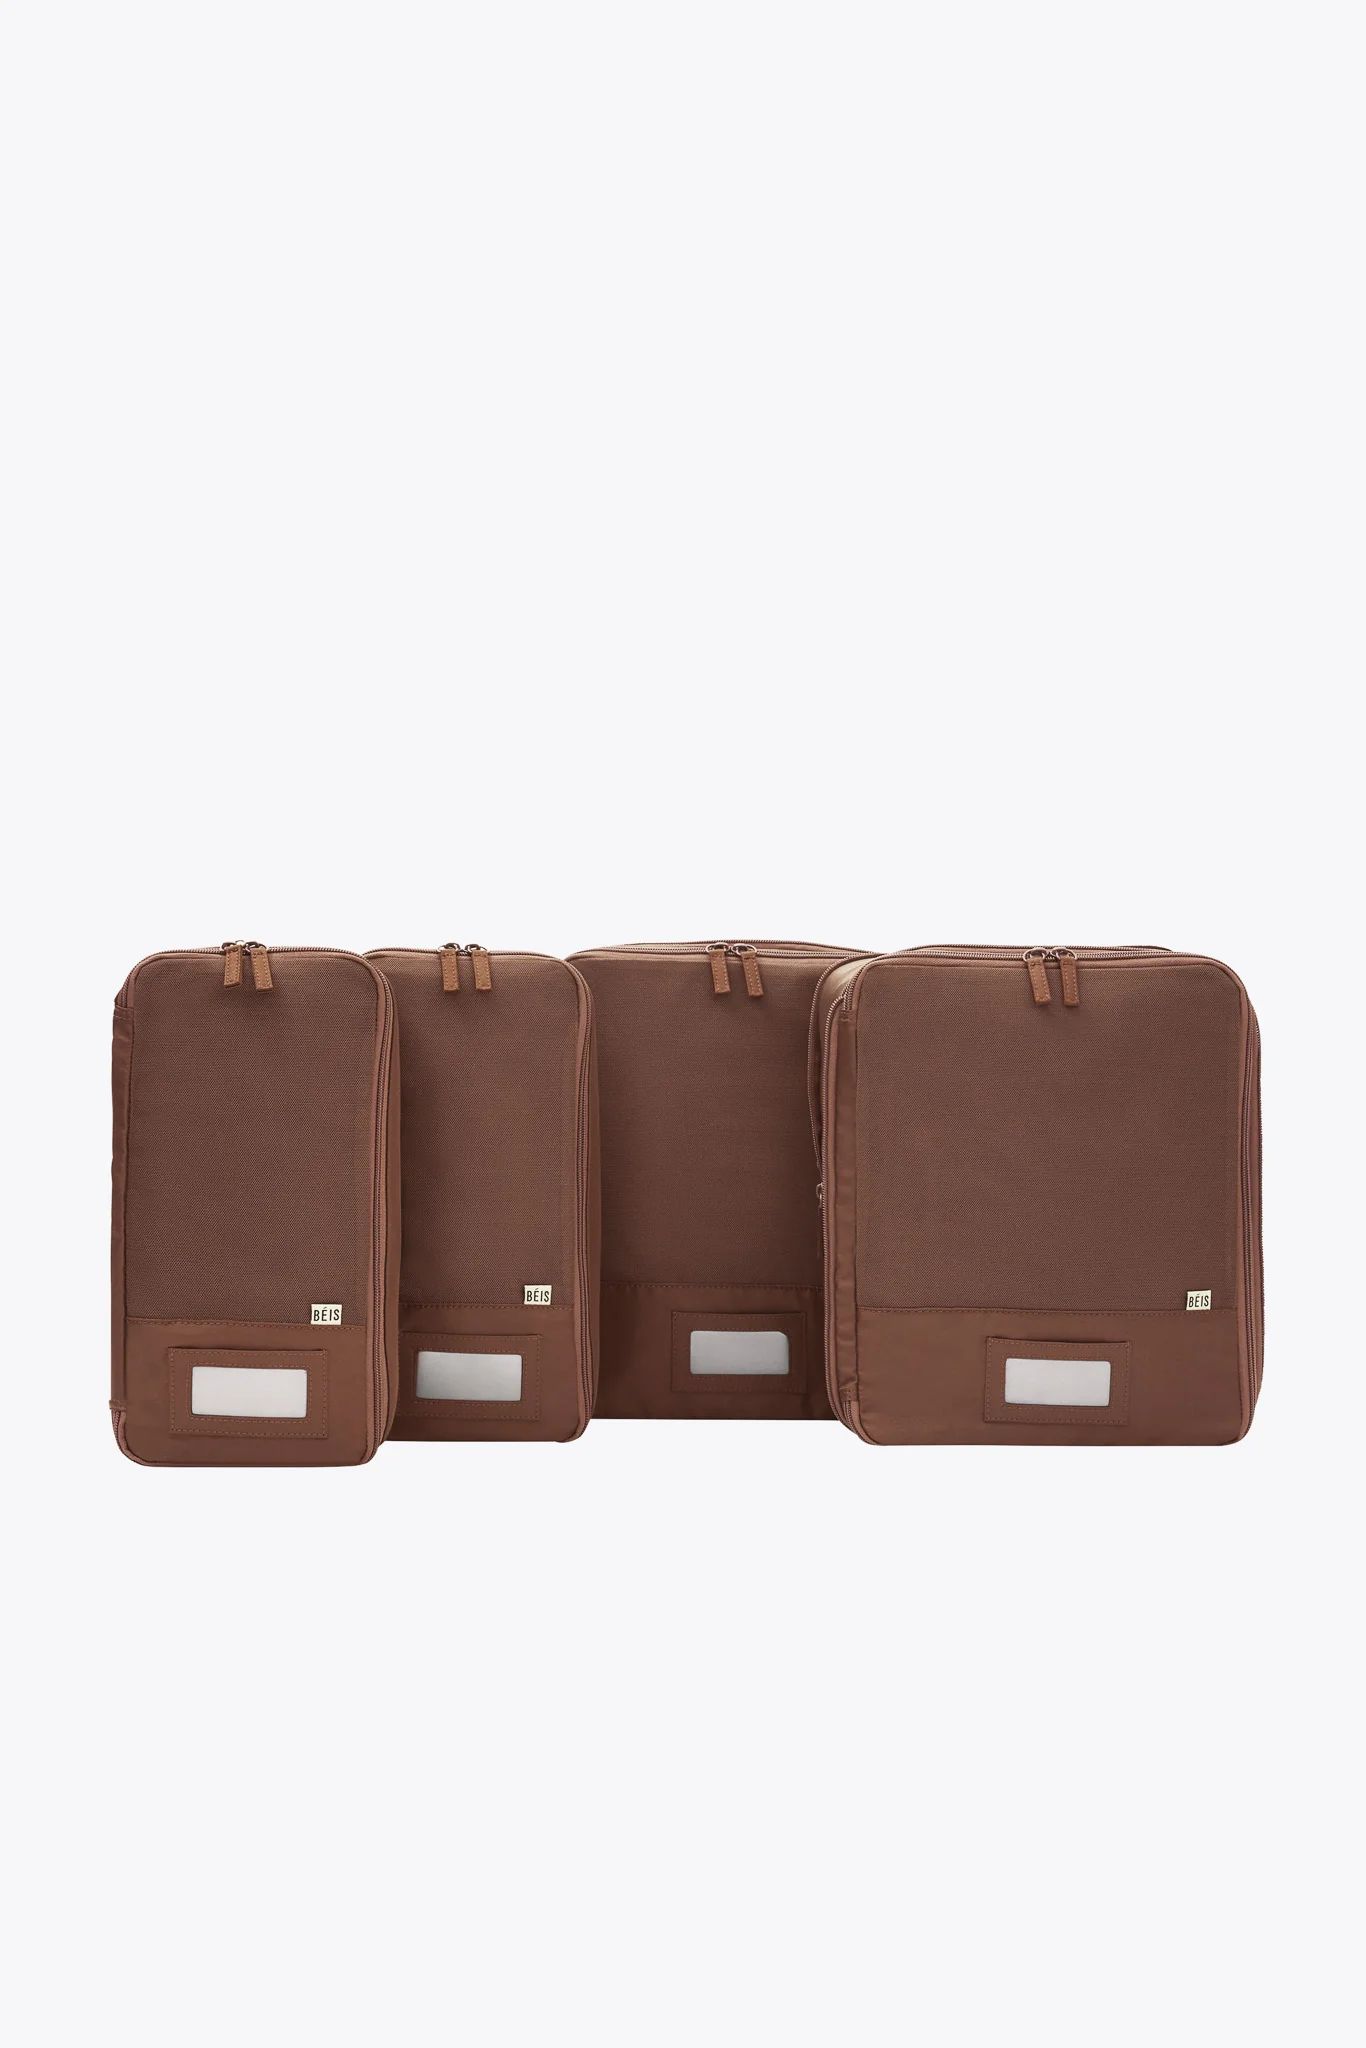 The Compression Packing Cubes 4 pc in Maple | BÉIS Travel